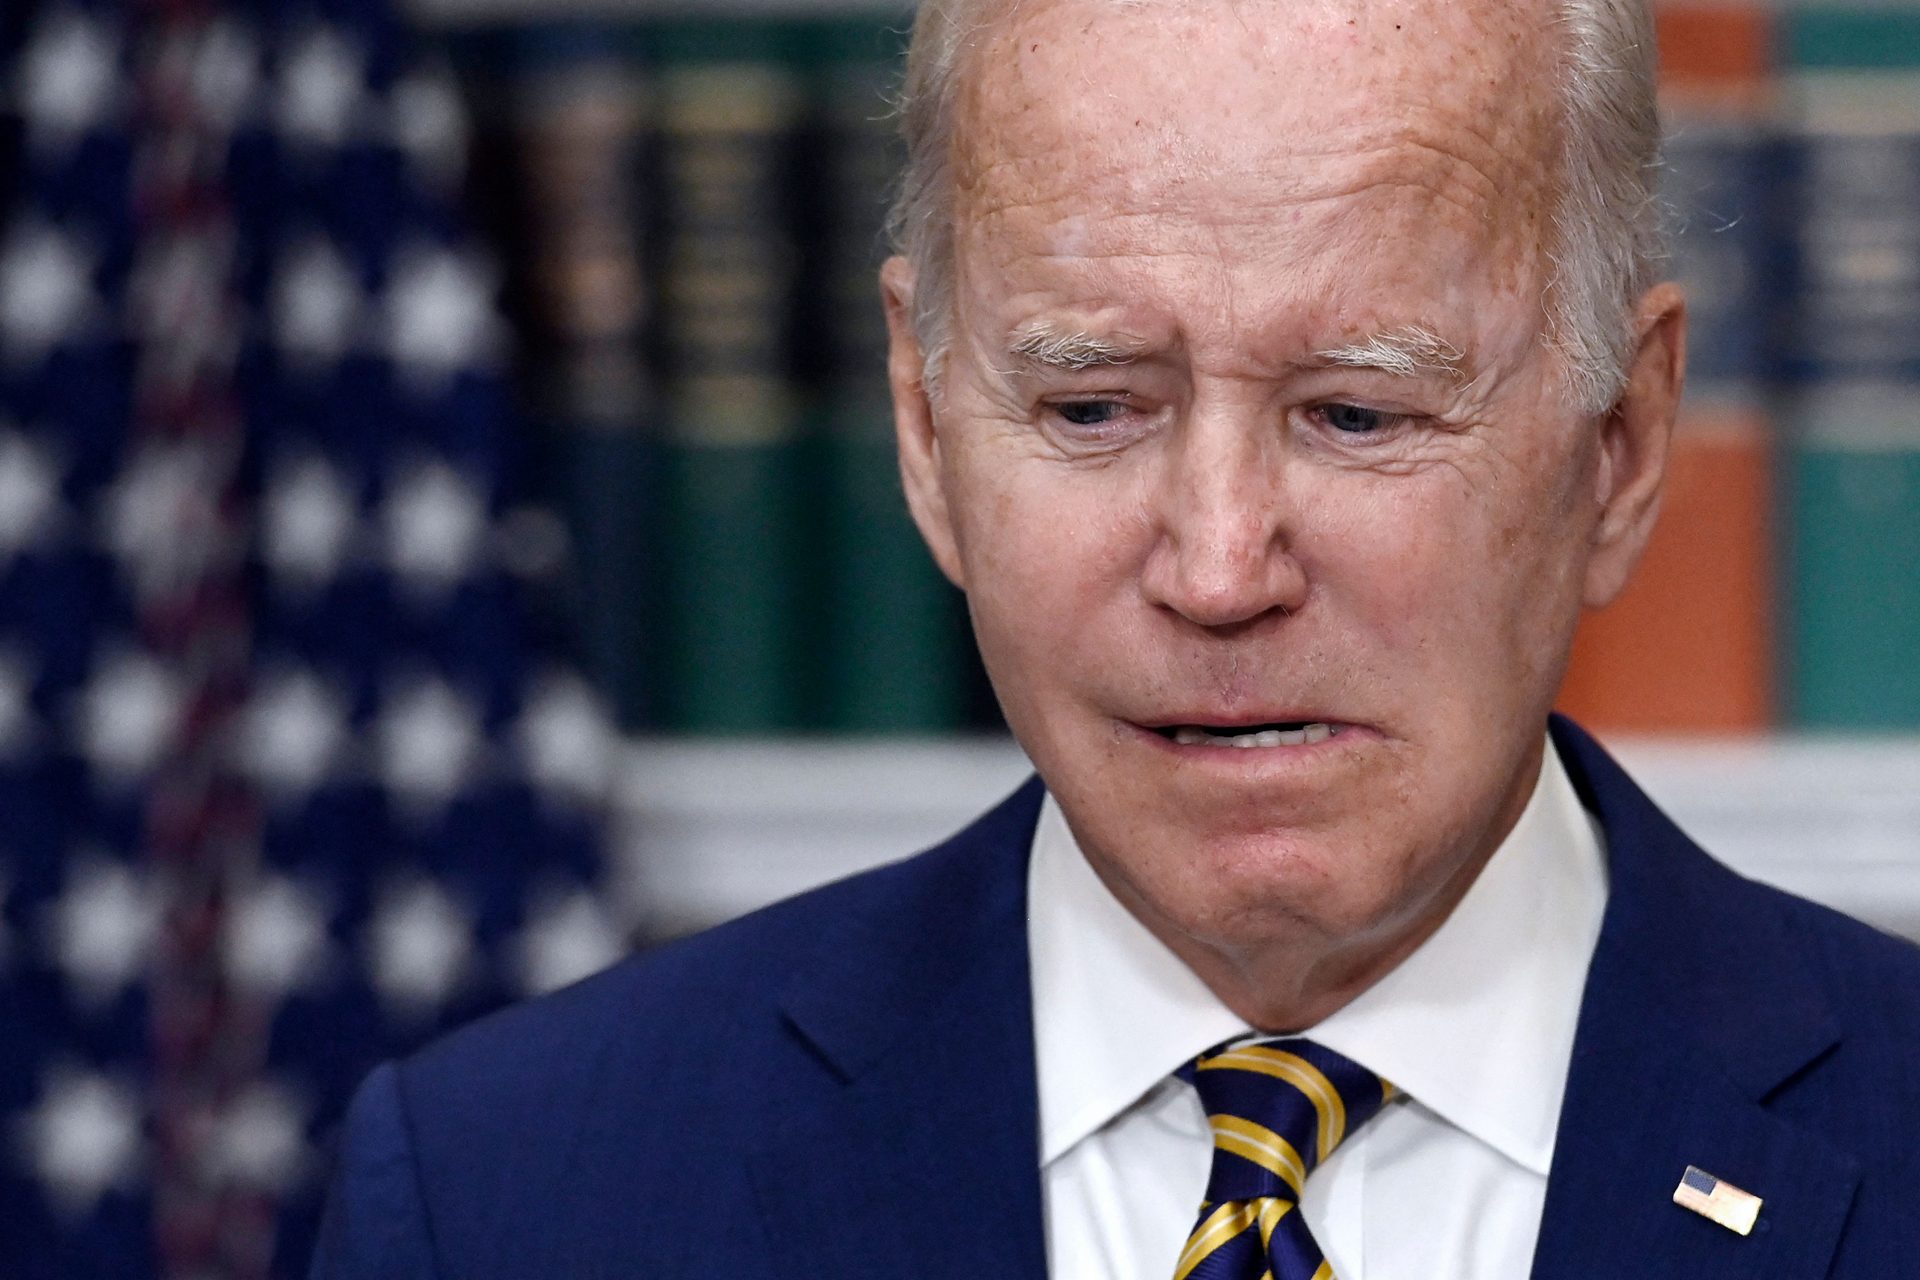 Democrats call for Biden to quit